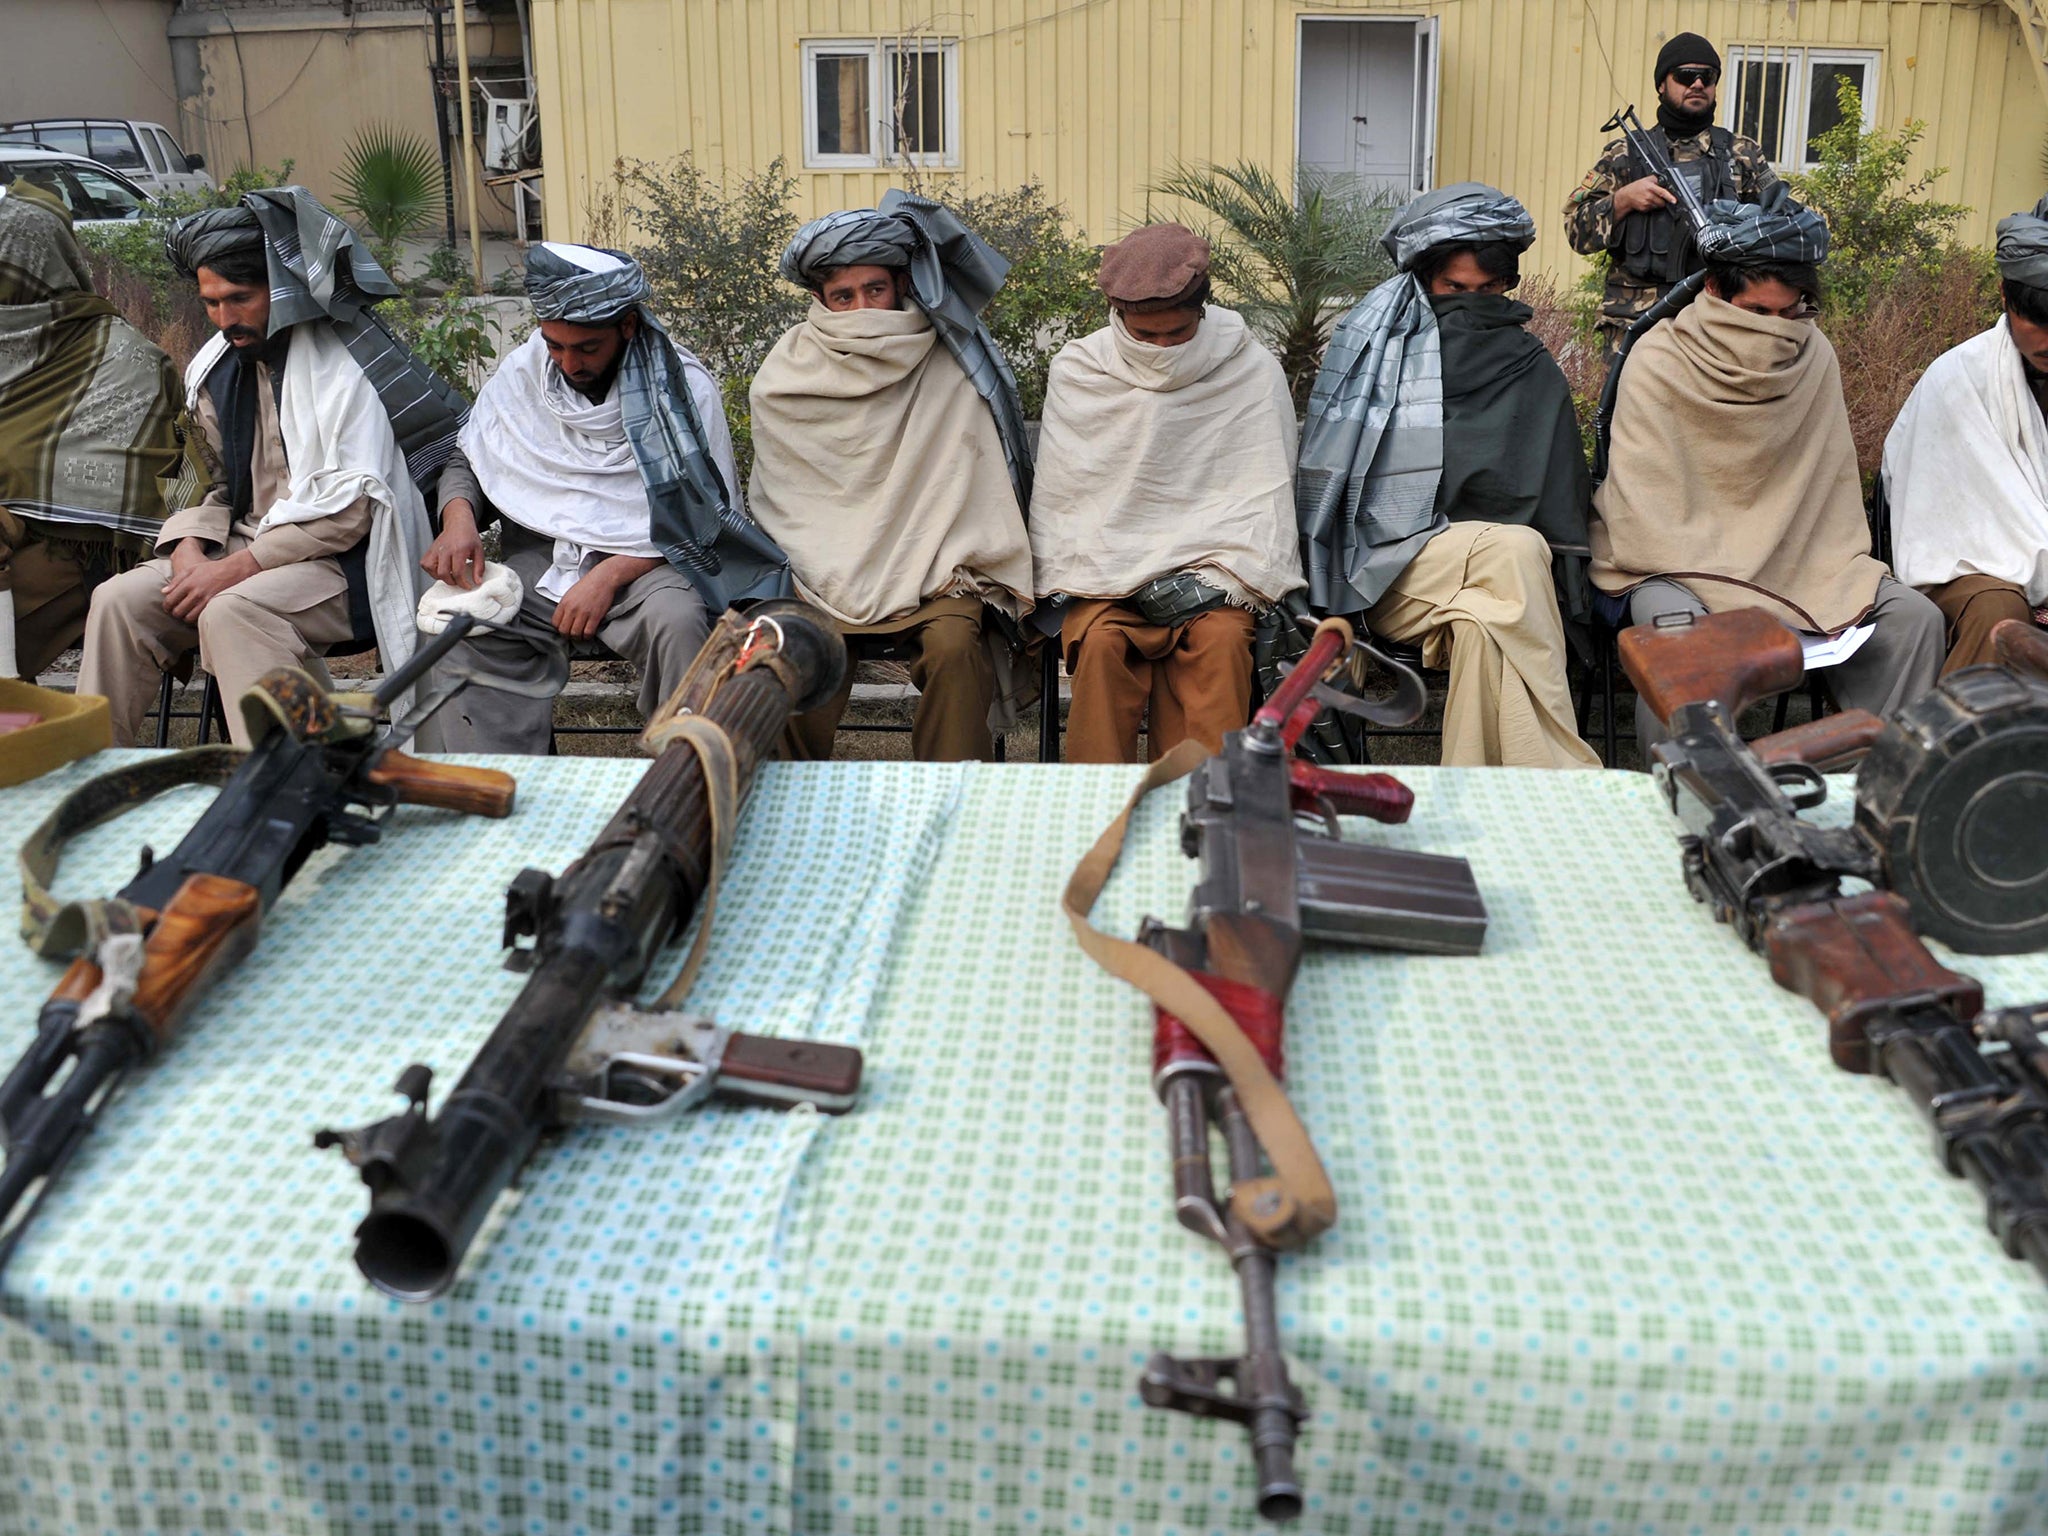 Former Taliban fighters sit alongside their weapons, prior to handing them over at a ceremony in Jalalabad in 2014